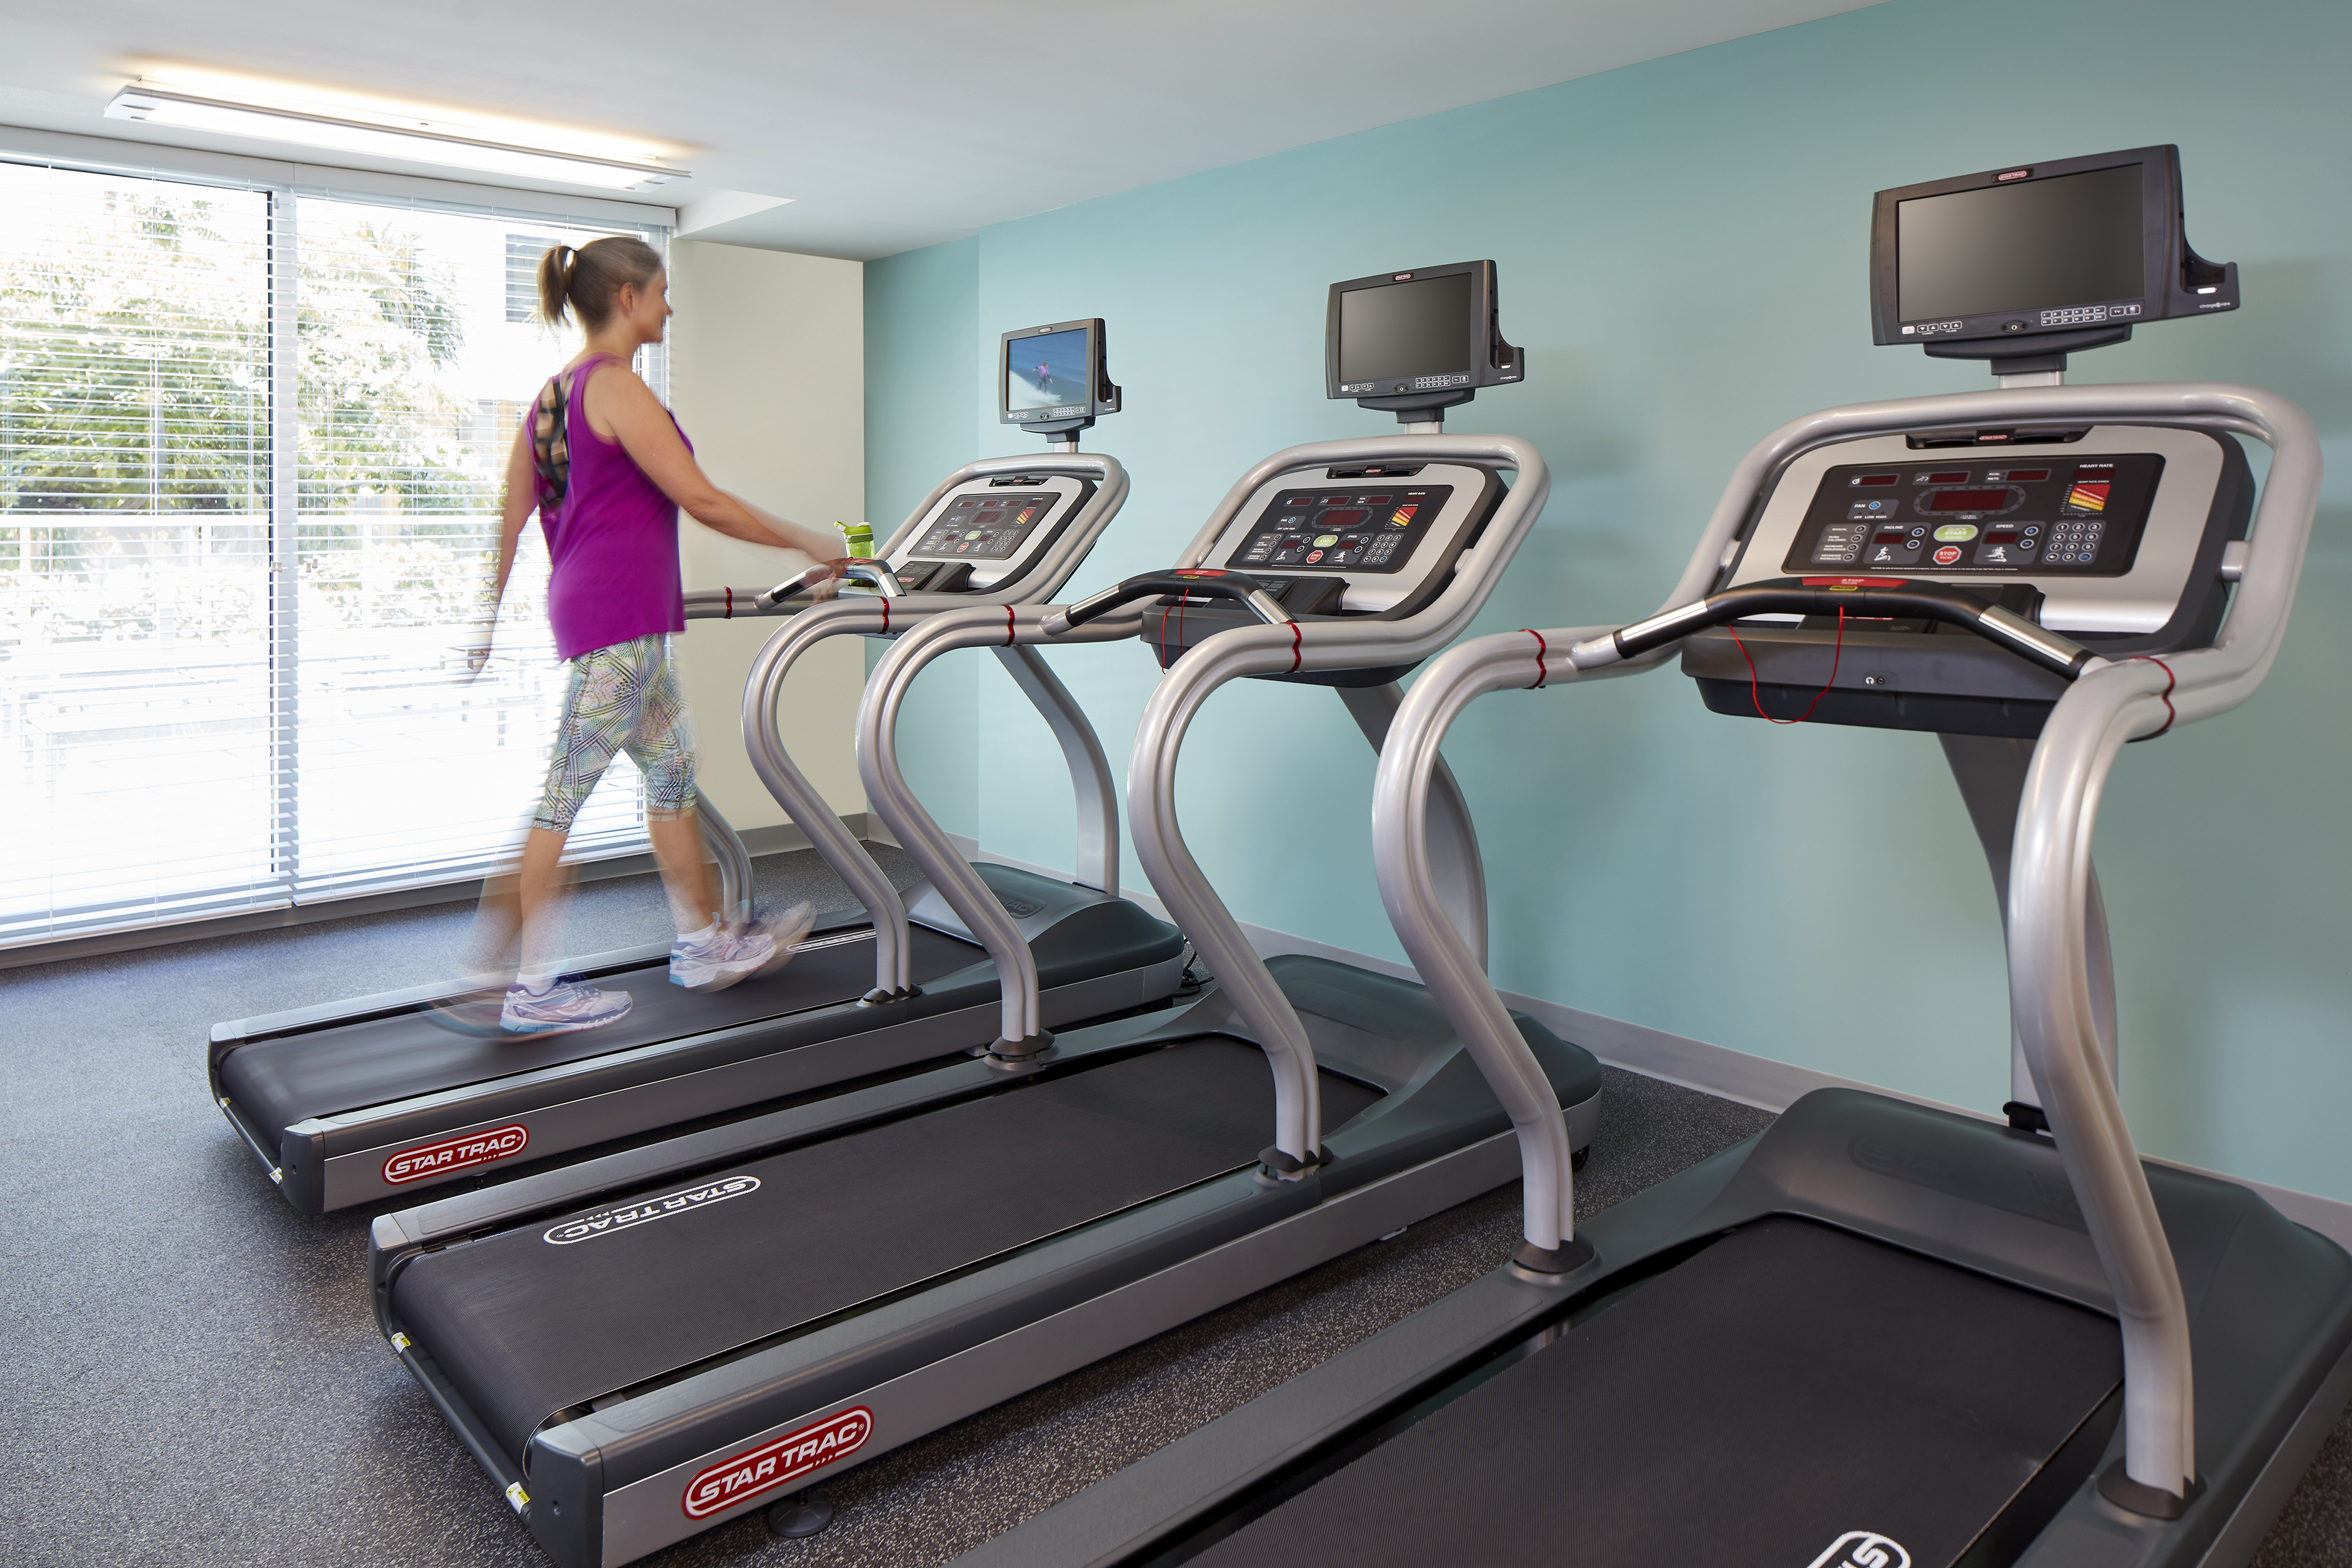 Woman on One of Three Fitness Center Treadmill by Large Windows